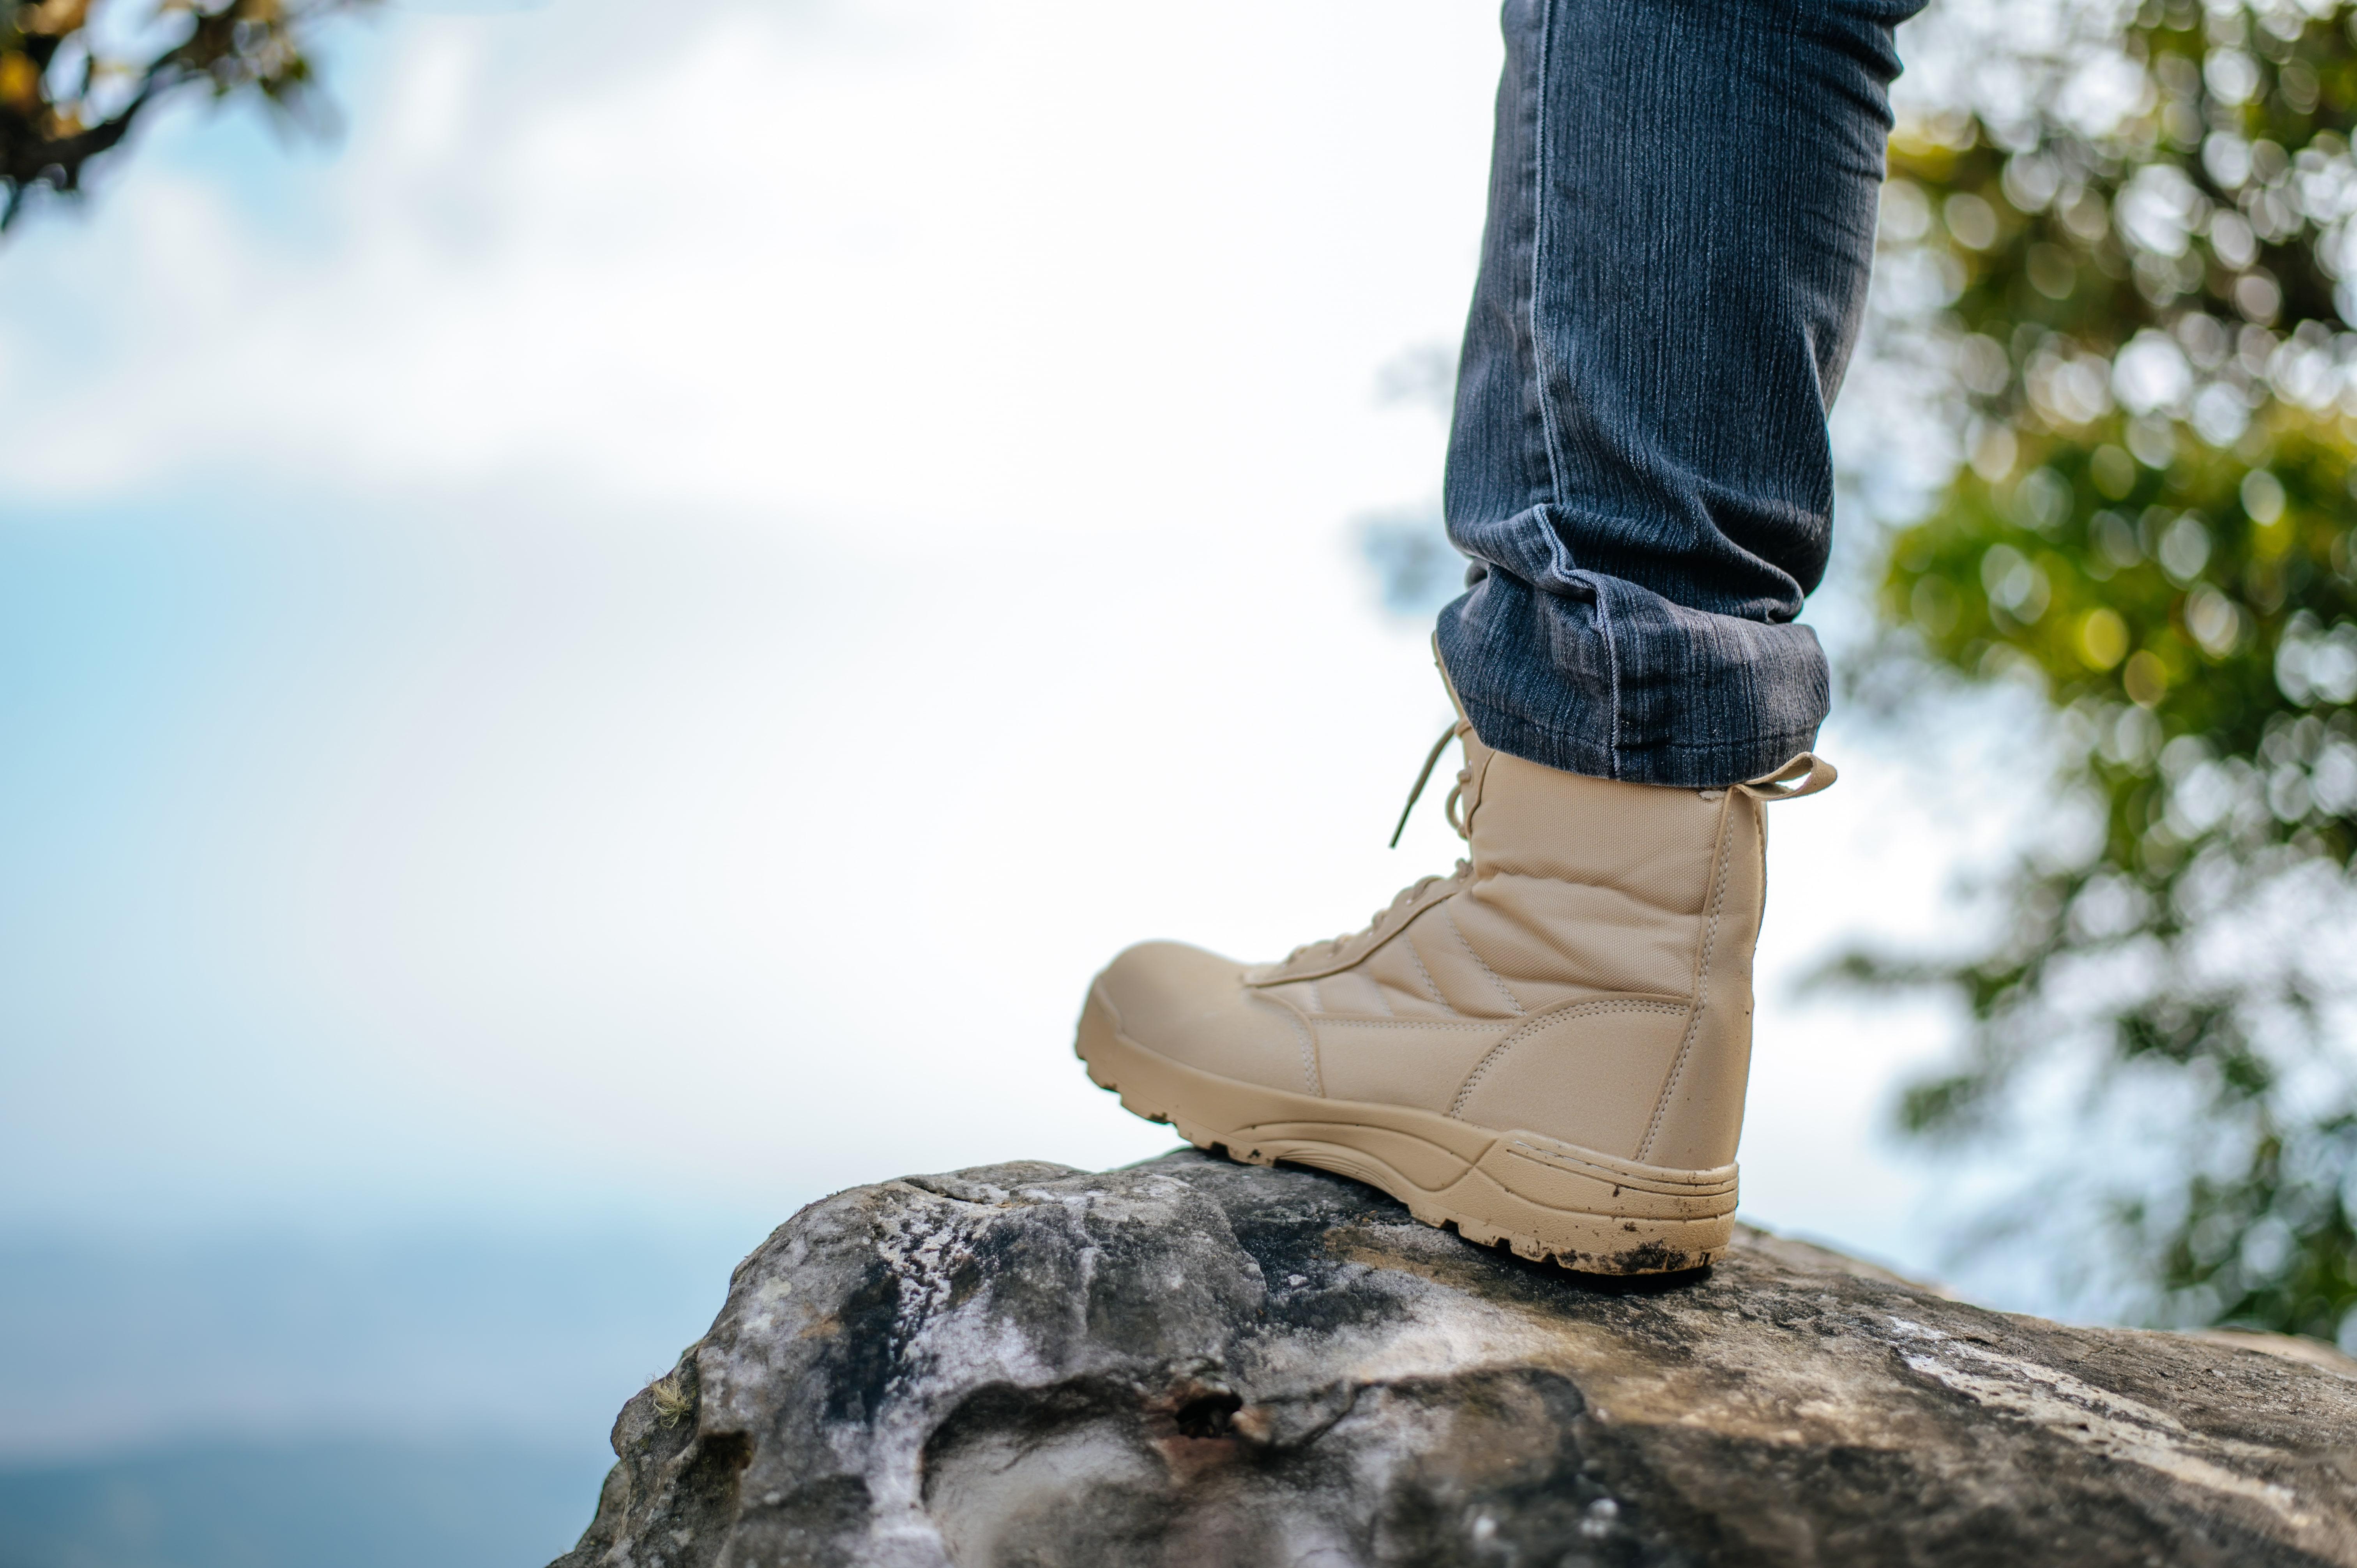 How to Wear Army Boots with Jeans: 5 Creative Ideas